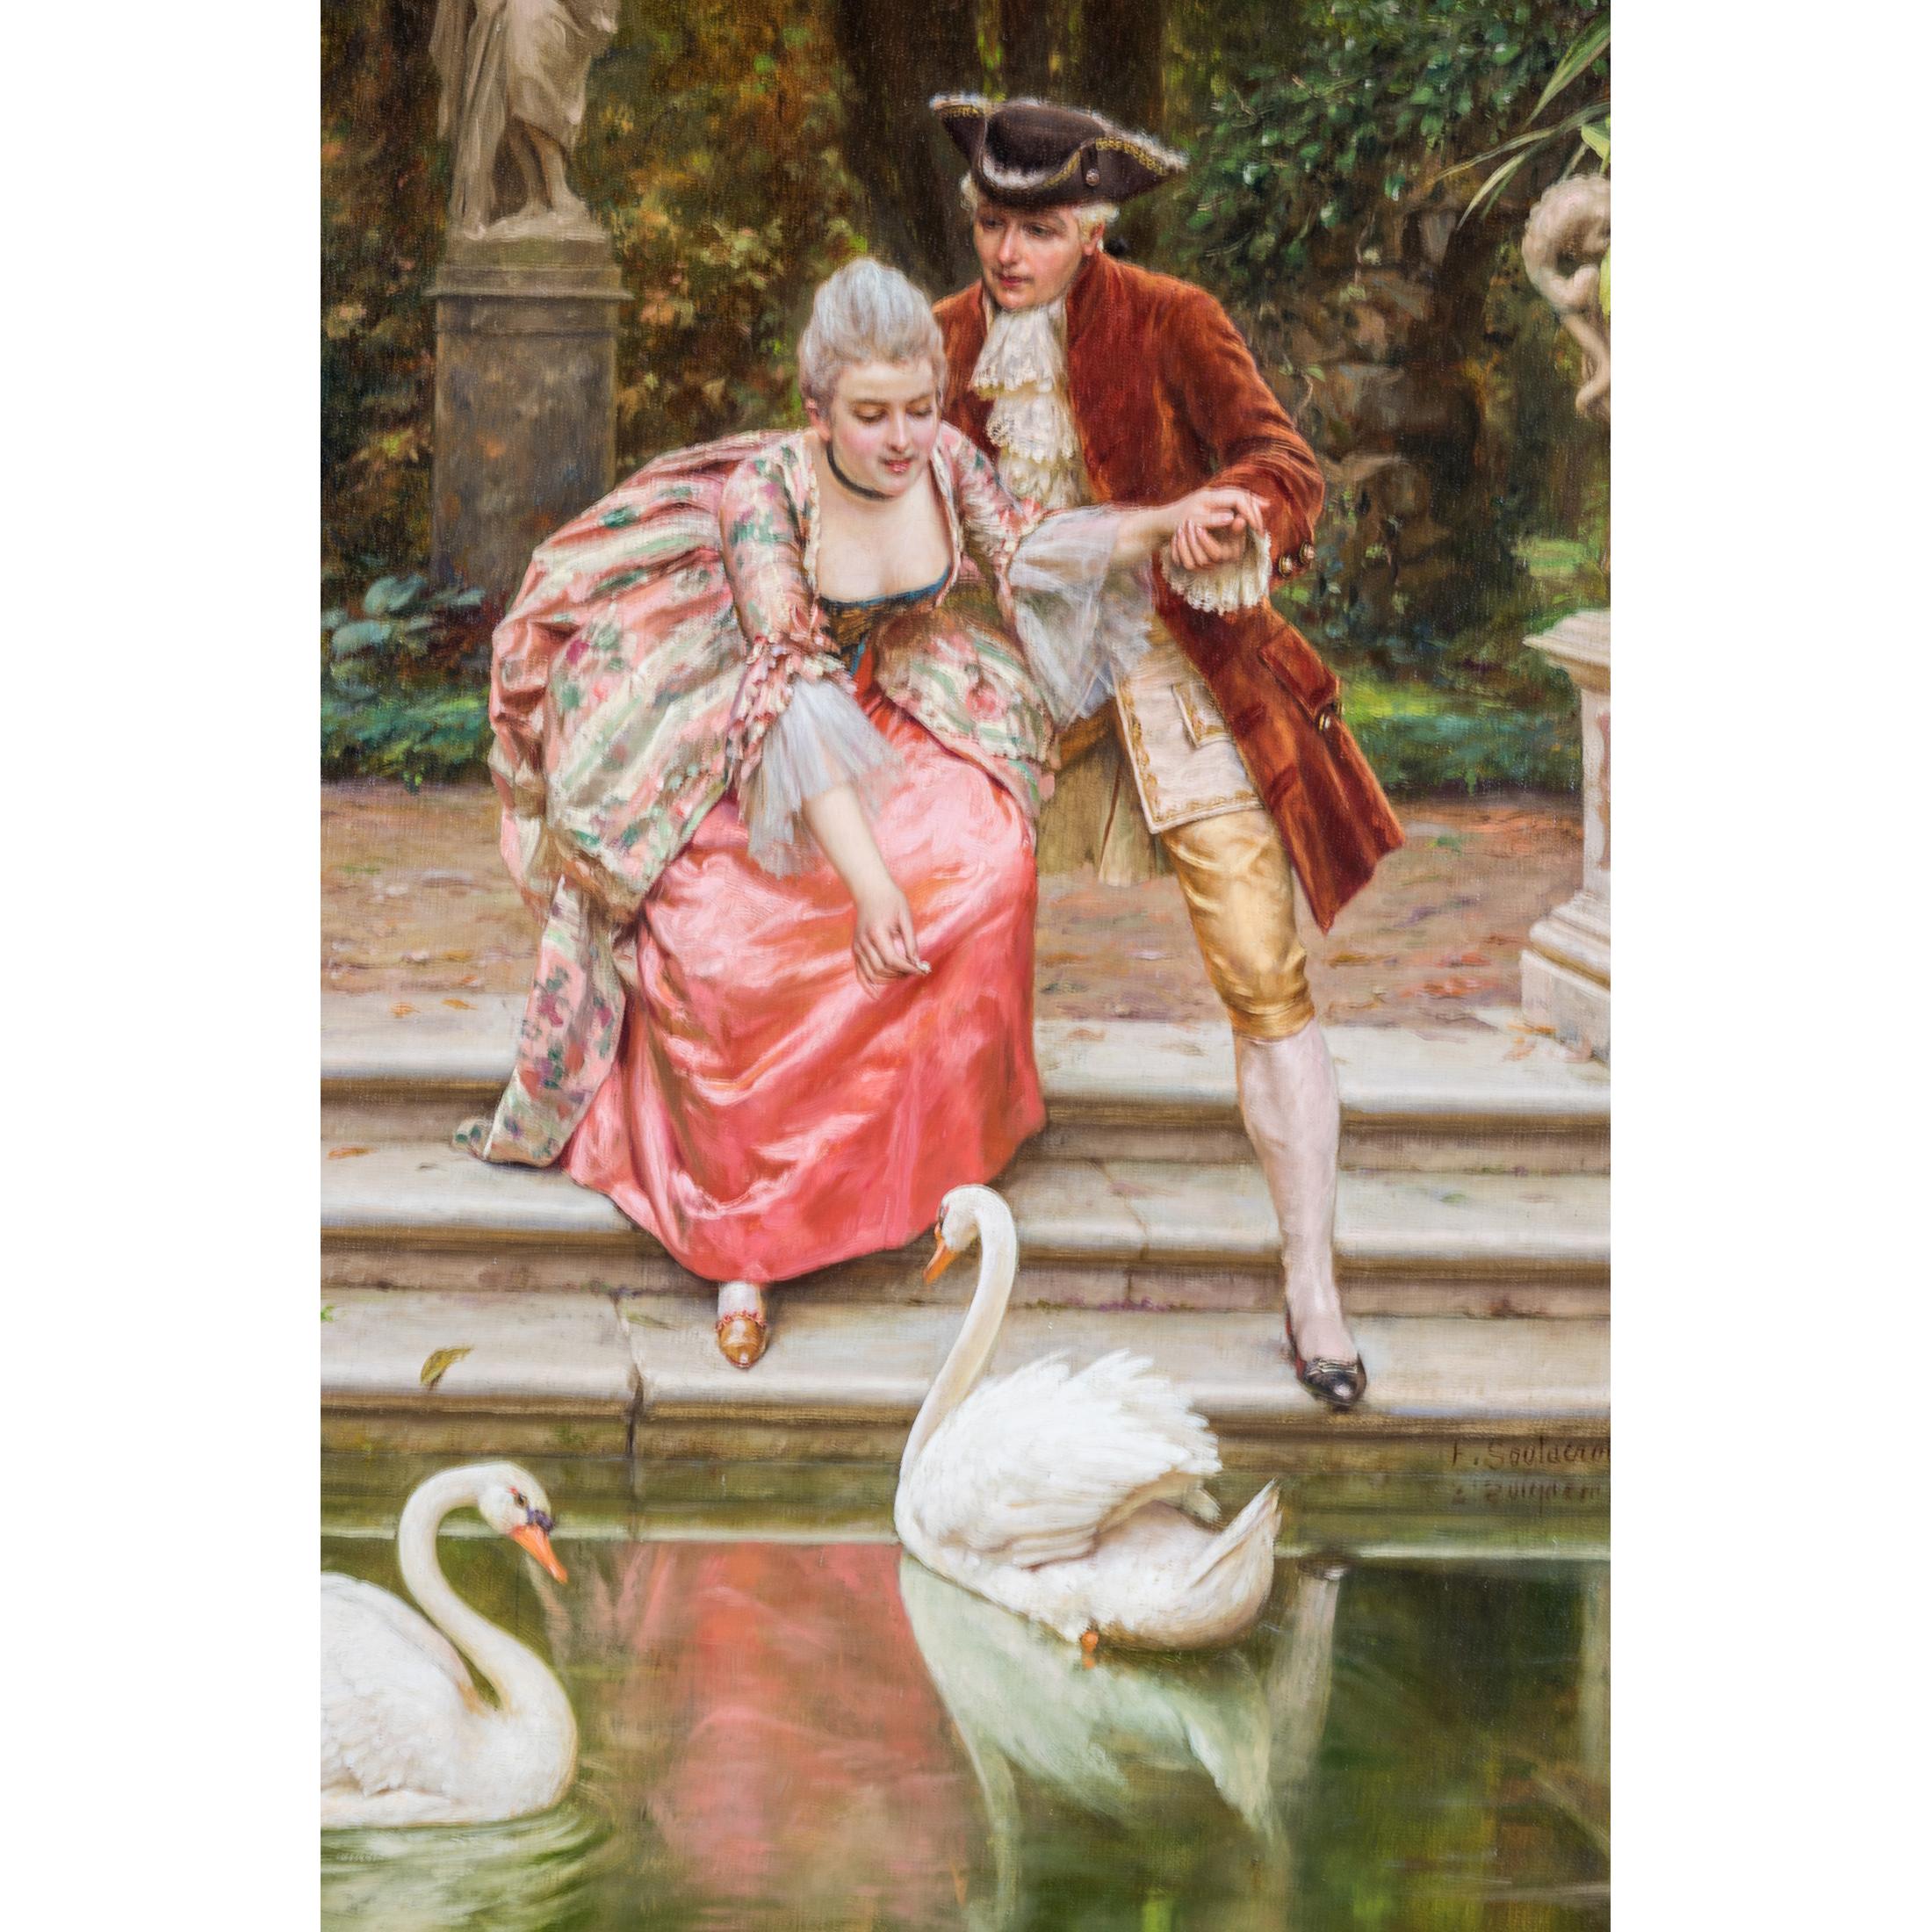 Elegant original French oil painting by Frederic Soulacroix depicting a couple feeding the swans. Signed 'F. Soulacroix' lower right.

Artist: Frederic Soulacroix (French, 1858-1933)
Medium: Oil on canvas
Dimension: 23 in x 15 in.; (framed) 36